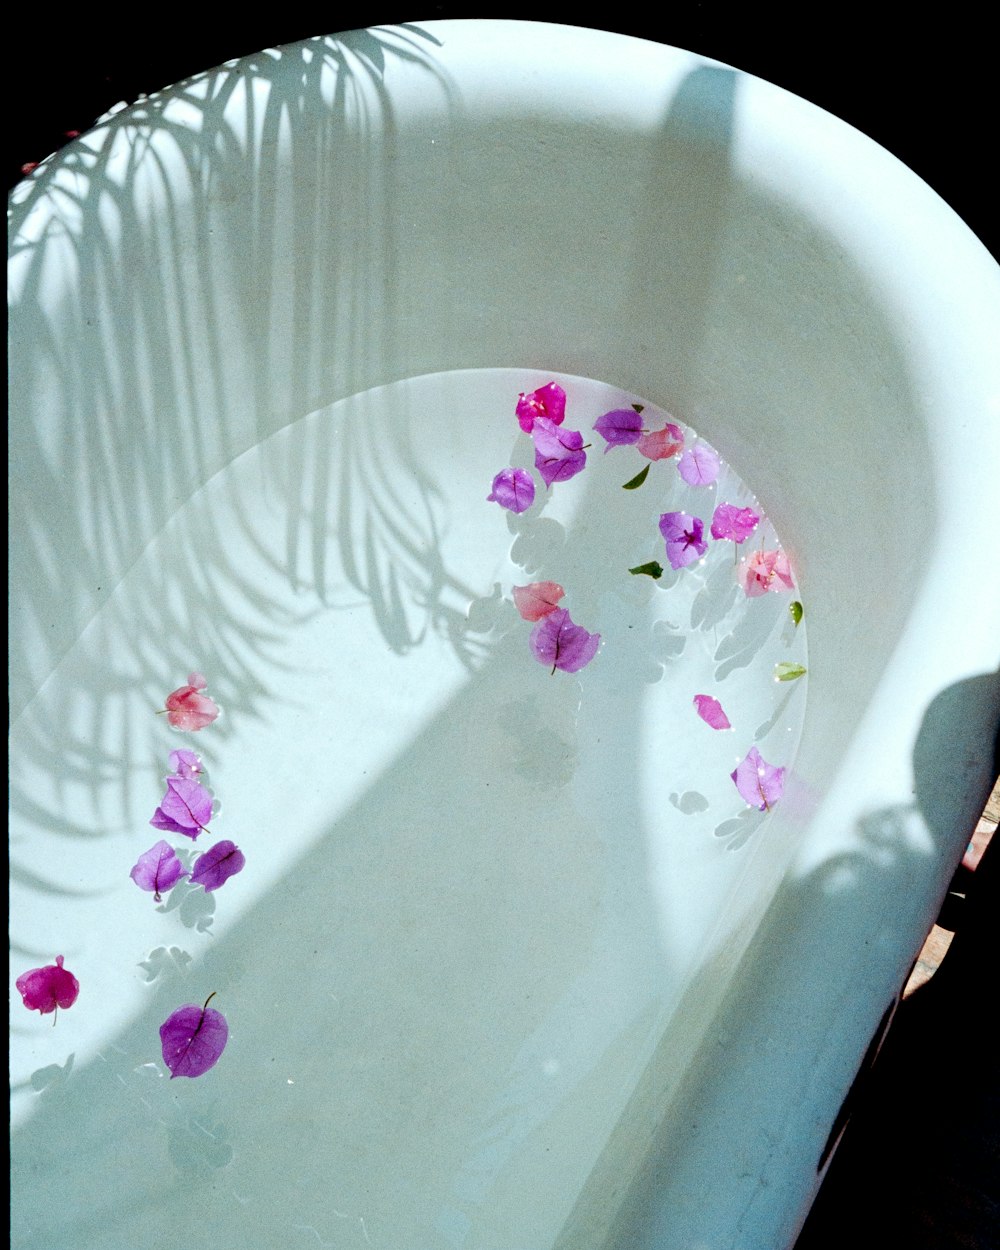 a white bowl with flowers in it